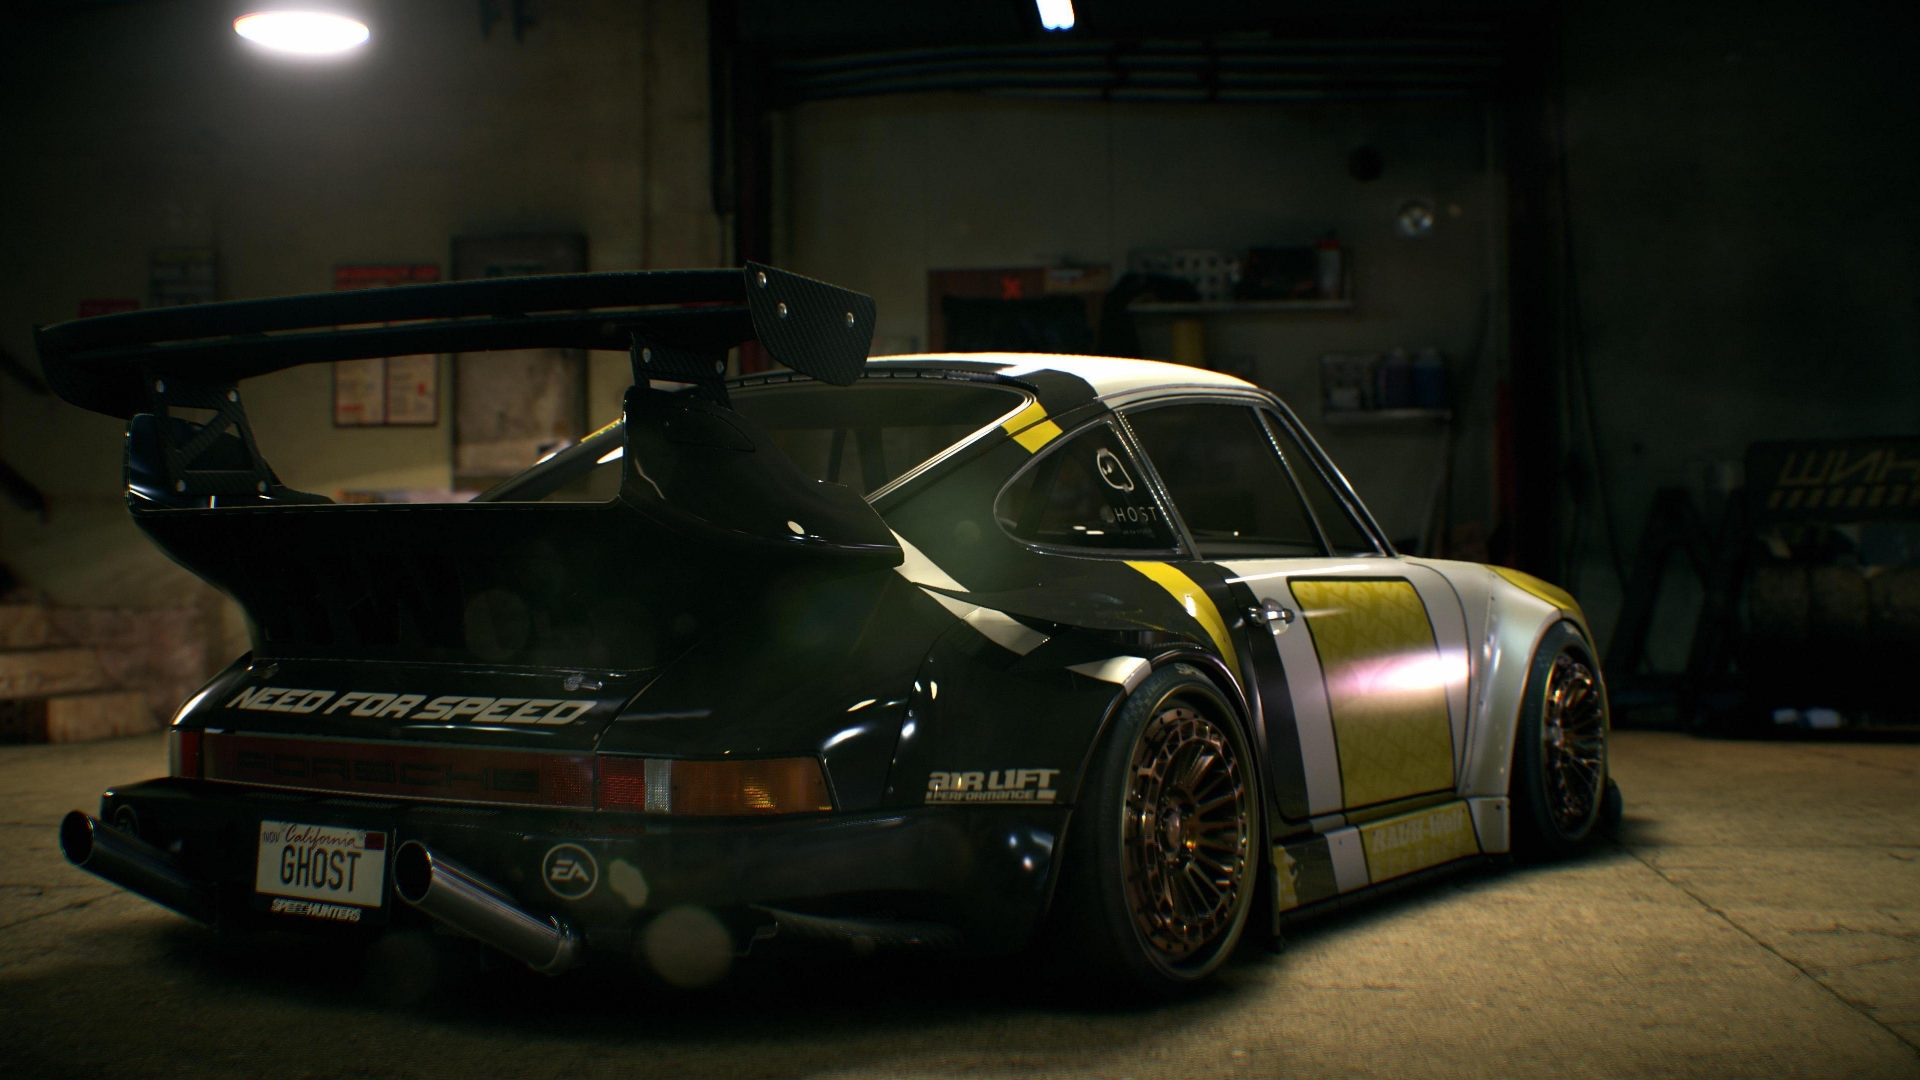 Need For Speed Porsche Ghost for 1920 x 1080 HDTV 1080p resolution